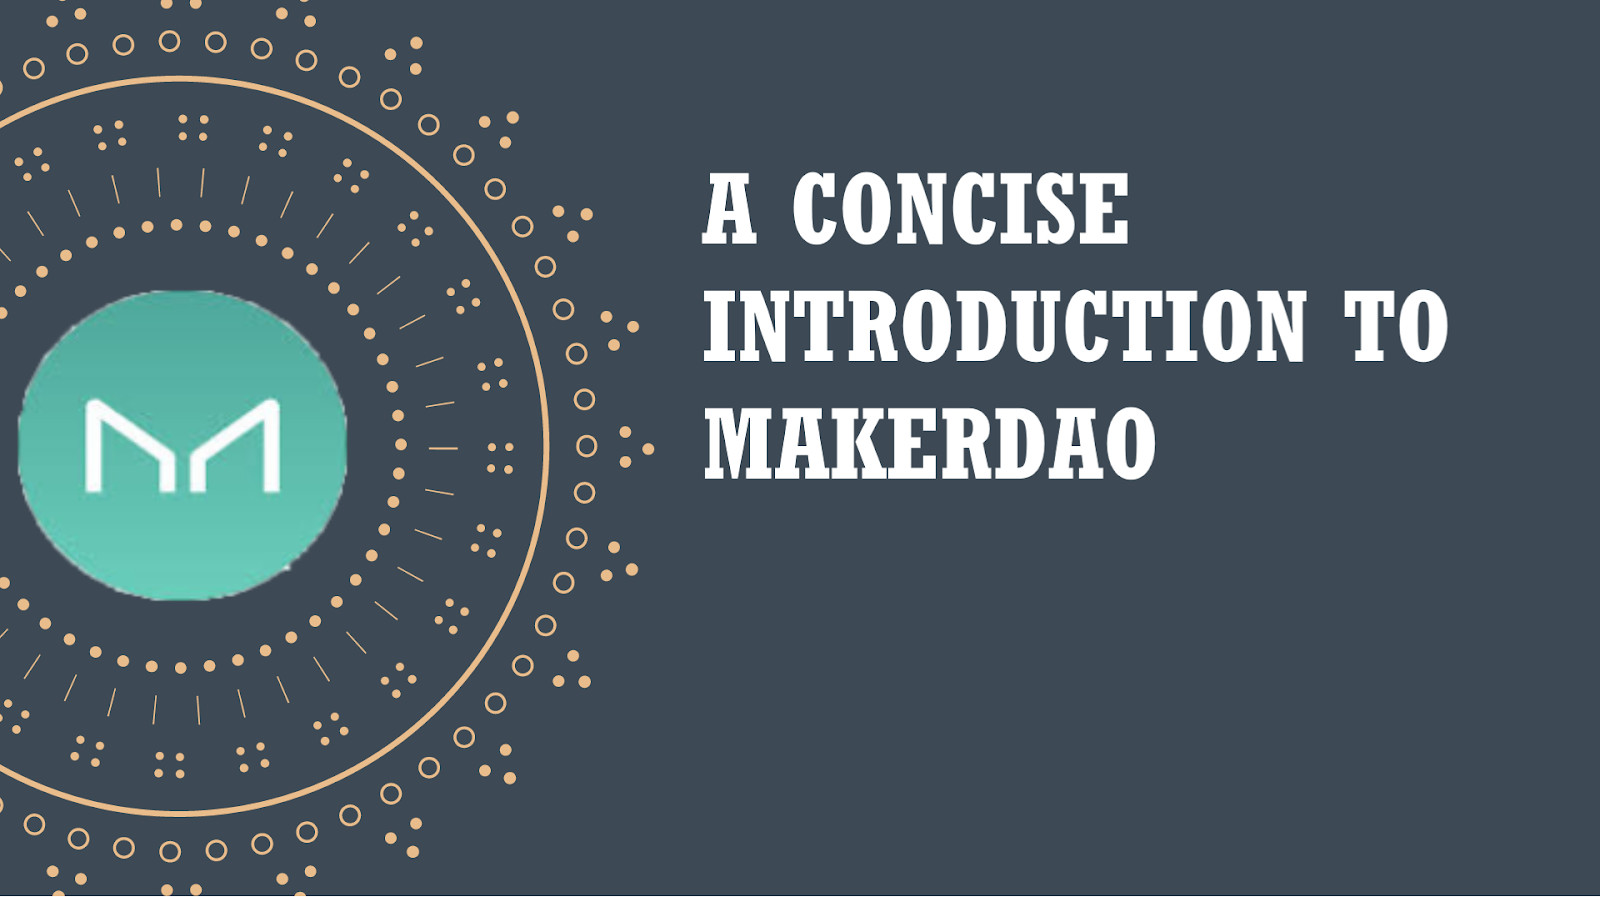 A concise introduction to makerdao